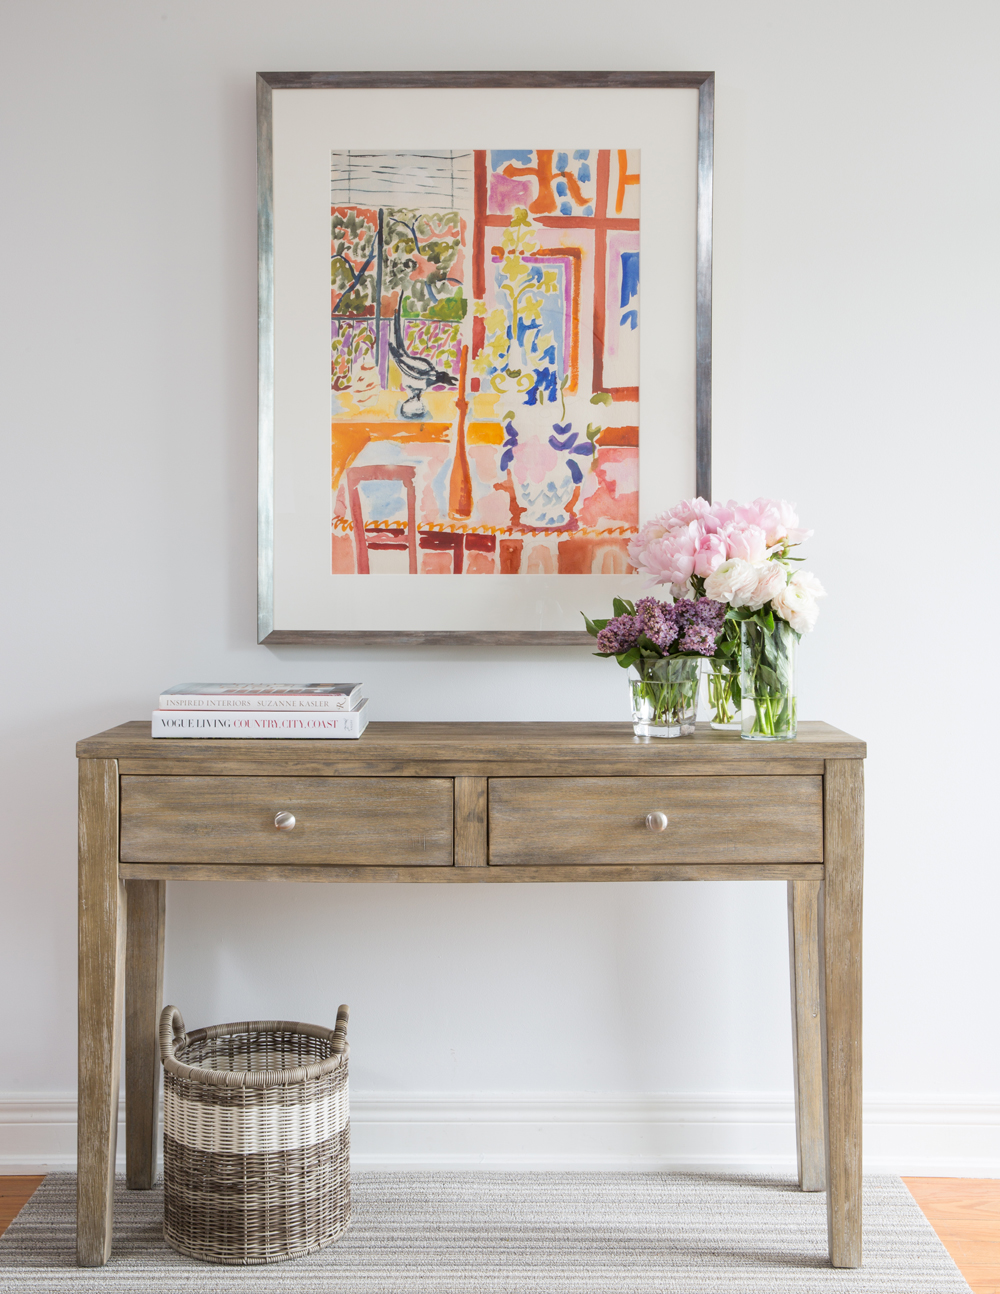 two drawer wood table, framed painting, basket below, Vogue Living bottom book on table